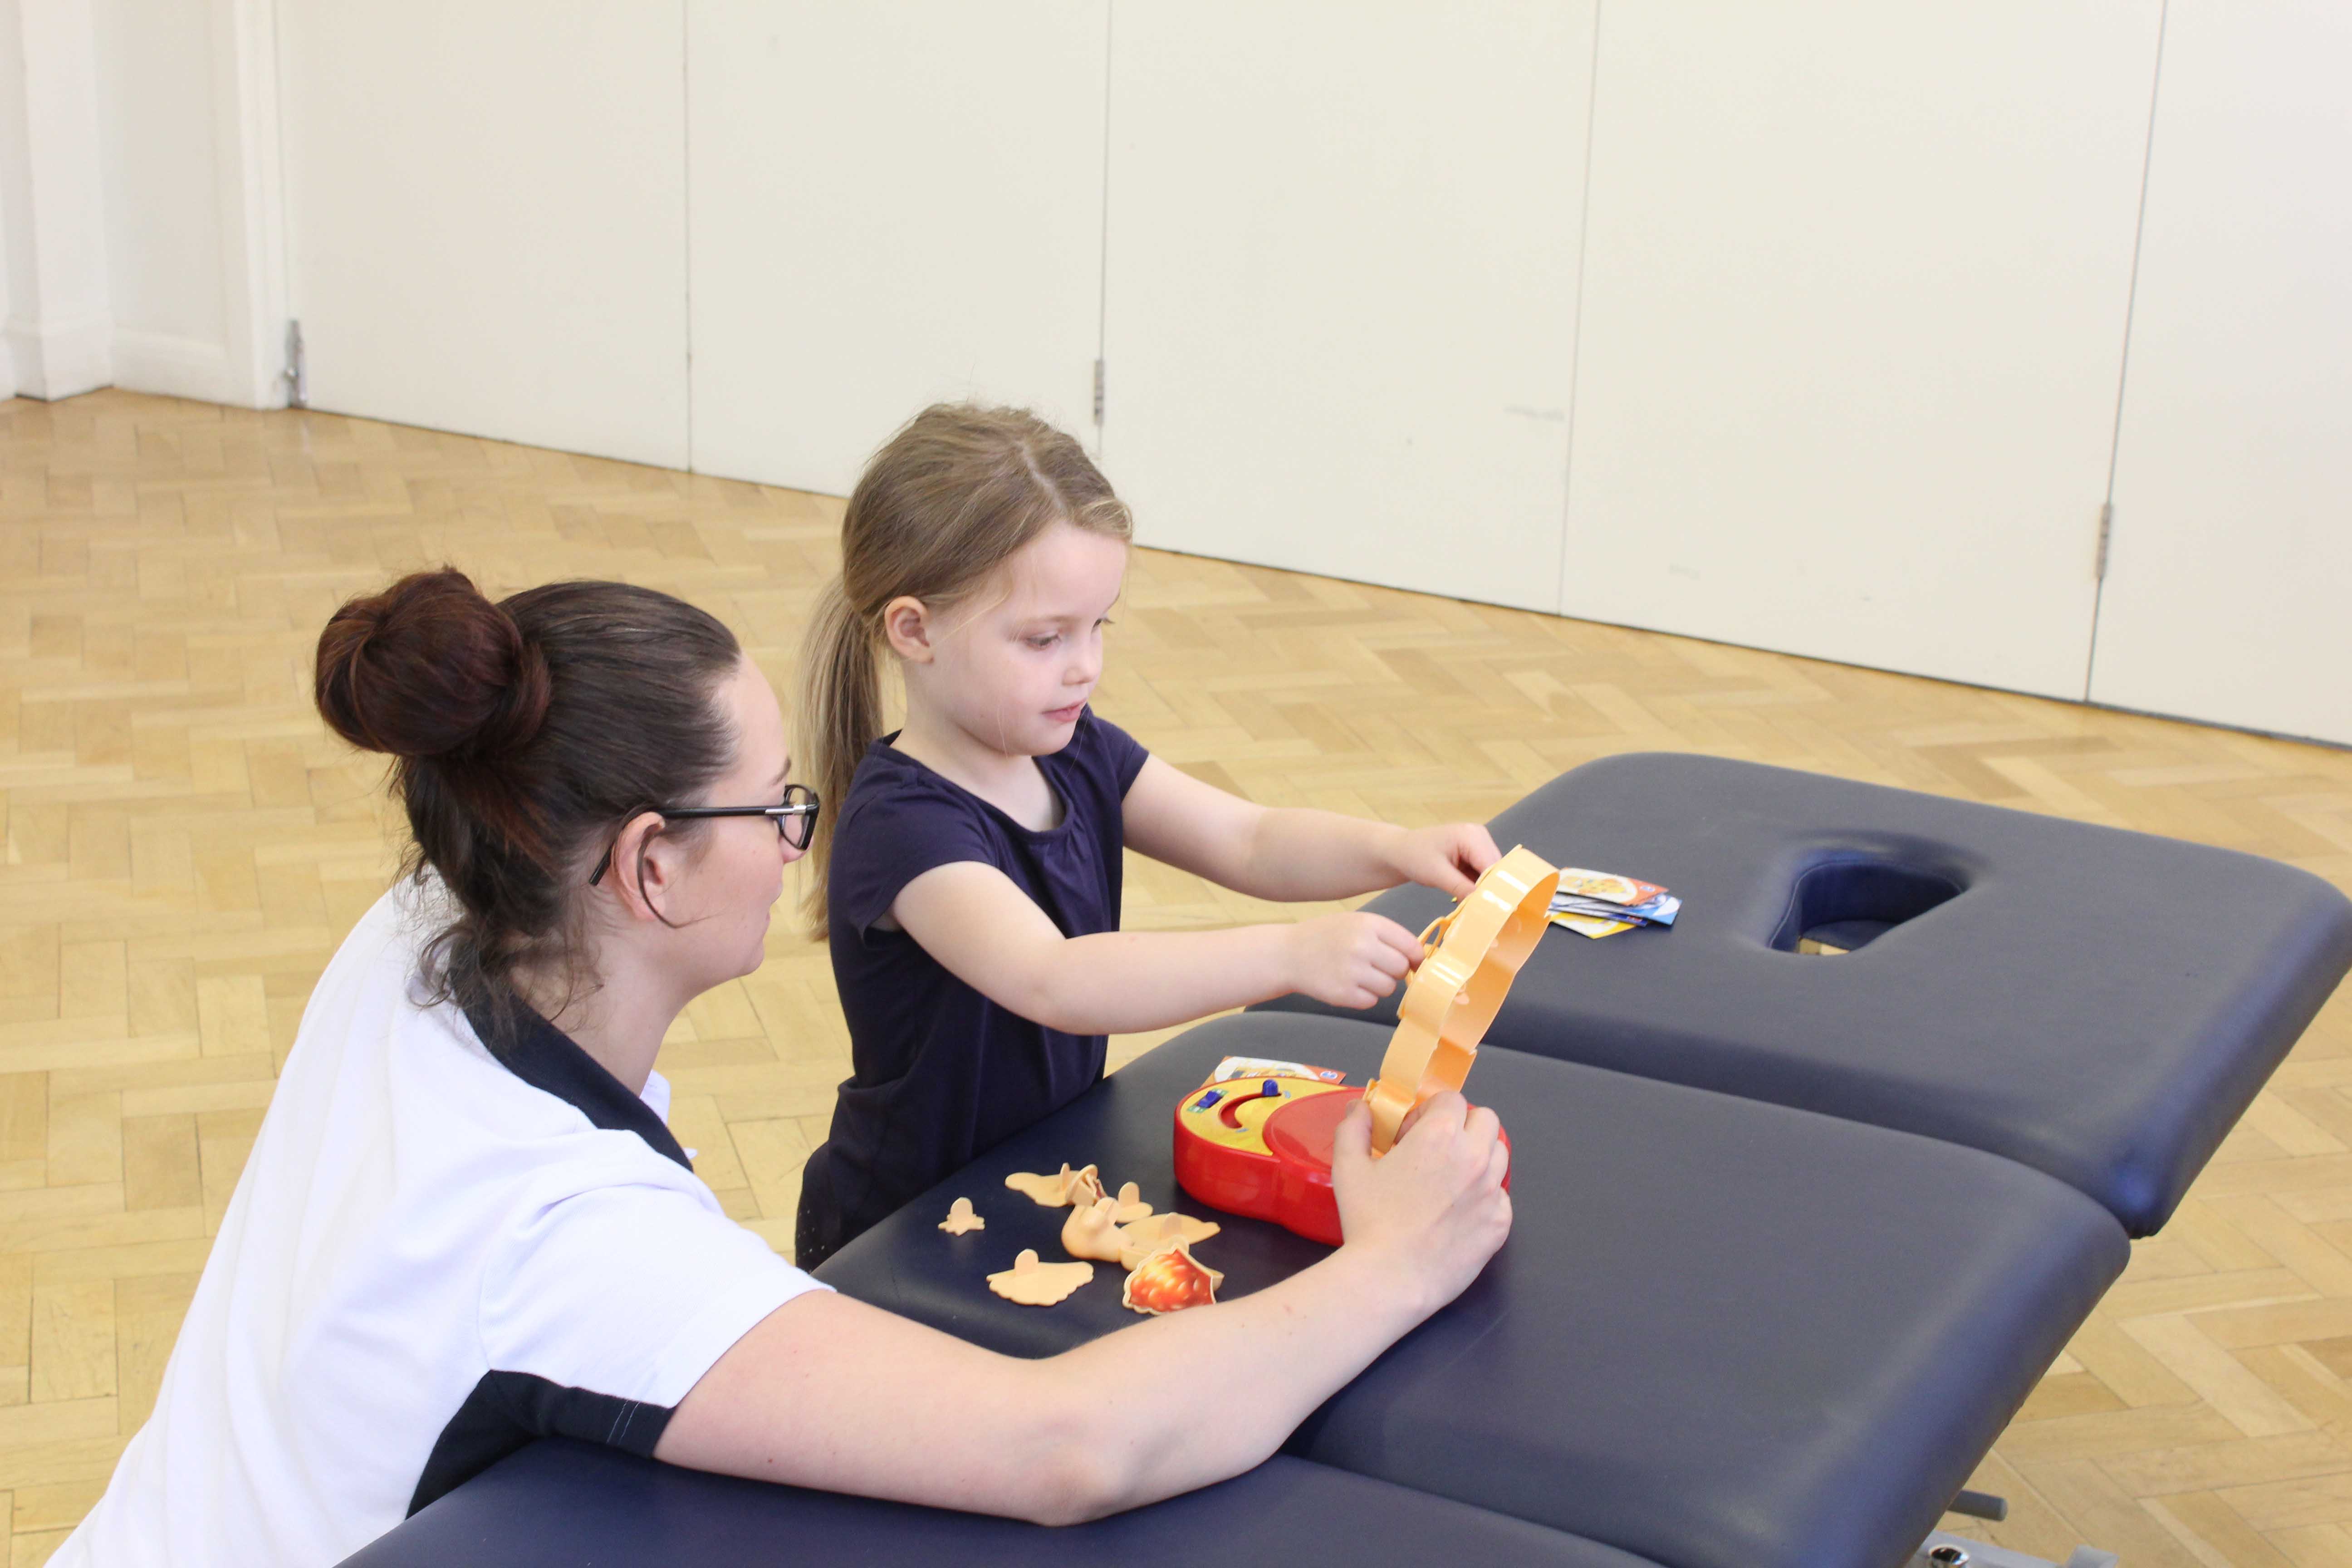 Functional fine motor skills practiced under supervision of a neurological physiotherapist